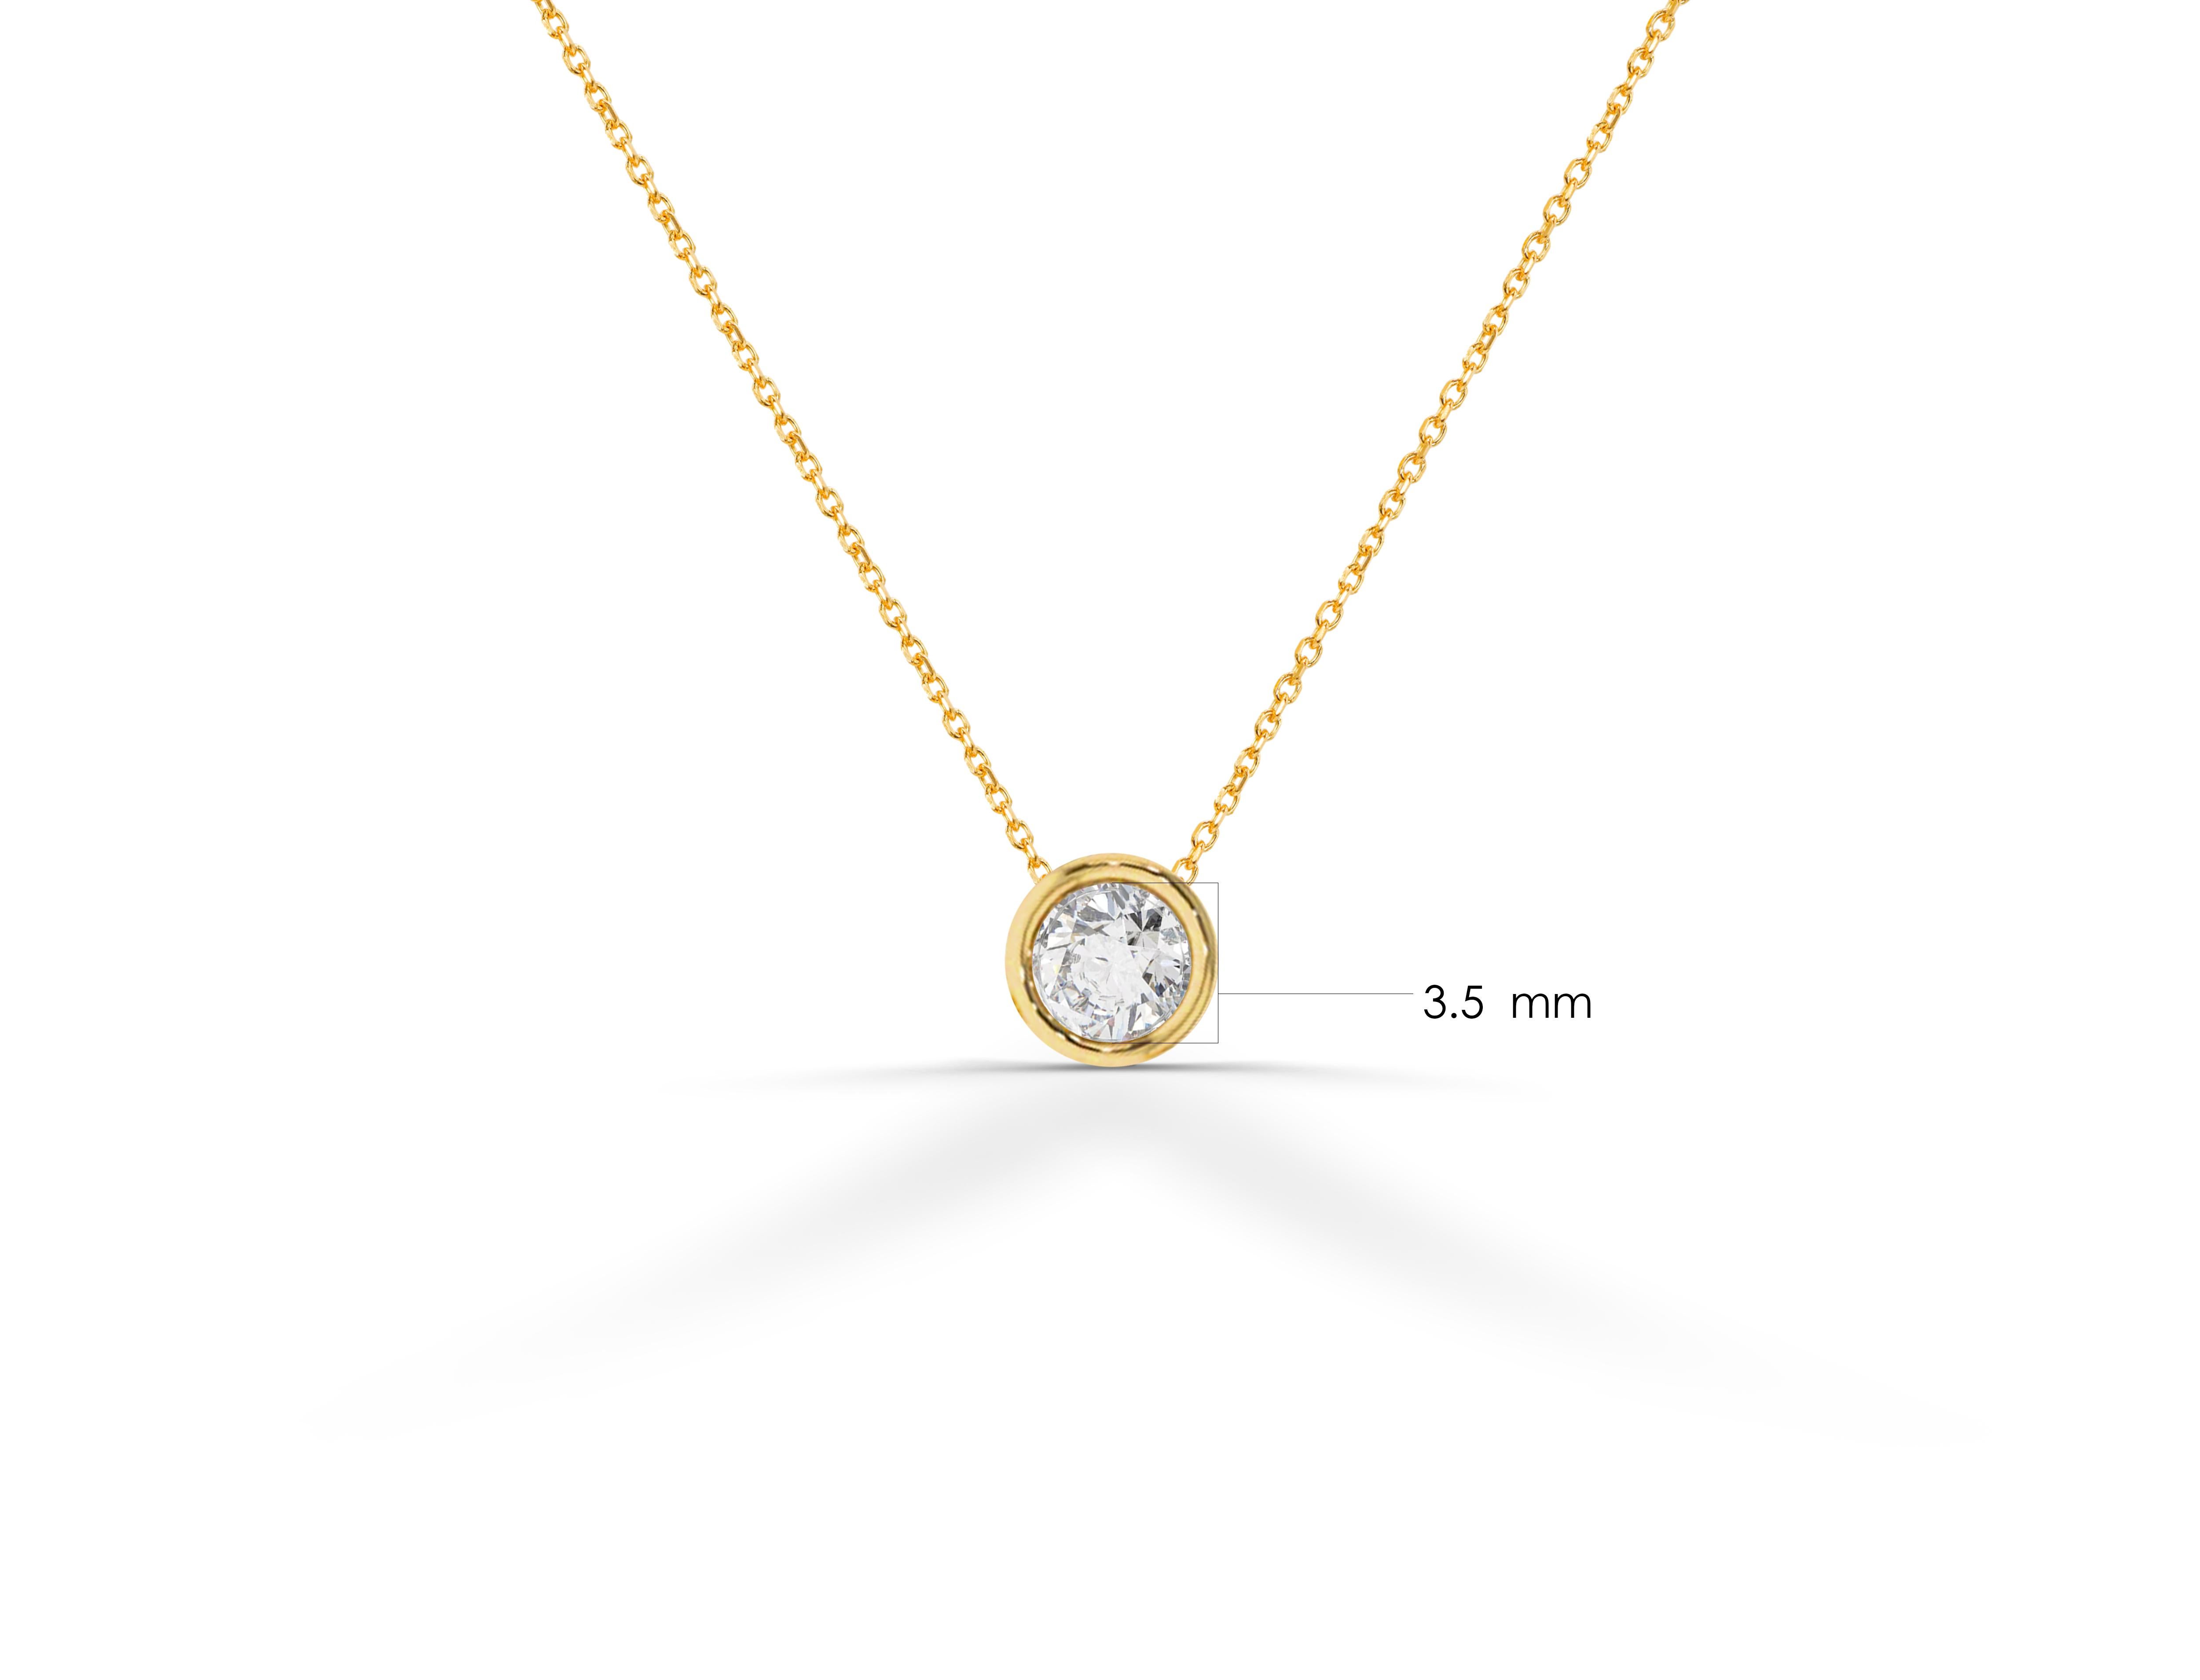 Diamond Solitaire Necklace is made of 14k solid gold available in three colors, White Gold / Rose Gold / Yellow Gold.

Brilliant white sparkly natural diamond bezel set hanging in center of a thin dainty gold chain a perfect choice for everyday